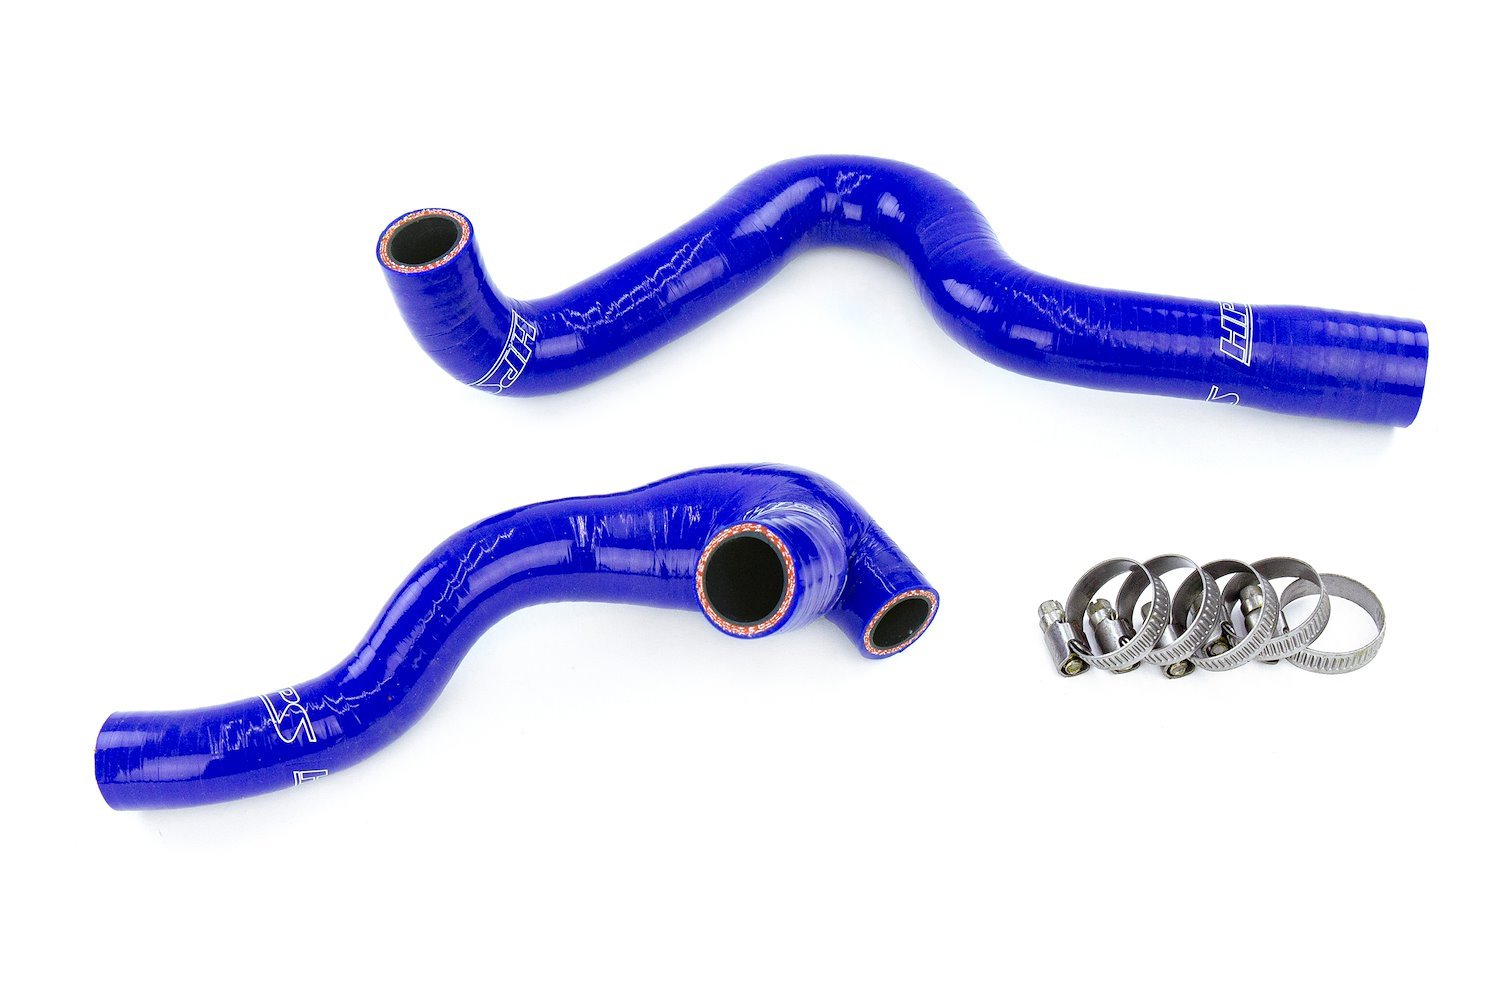 57-1934-BLUE Breather & BPV Hose Kit, Reinforced Fluorolined Silicone, Replaces Rubber Breather & Bypass Valve Hoses